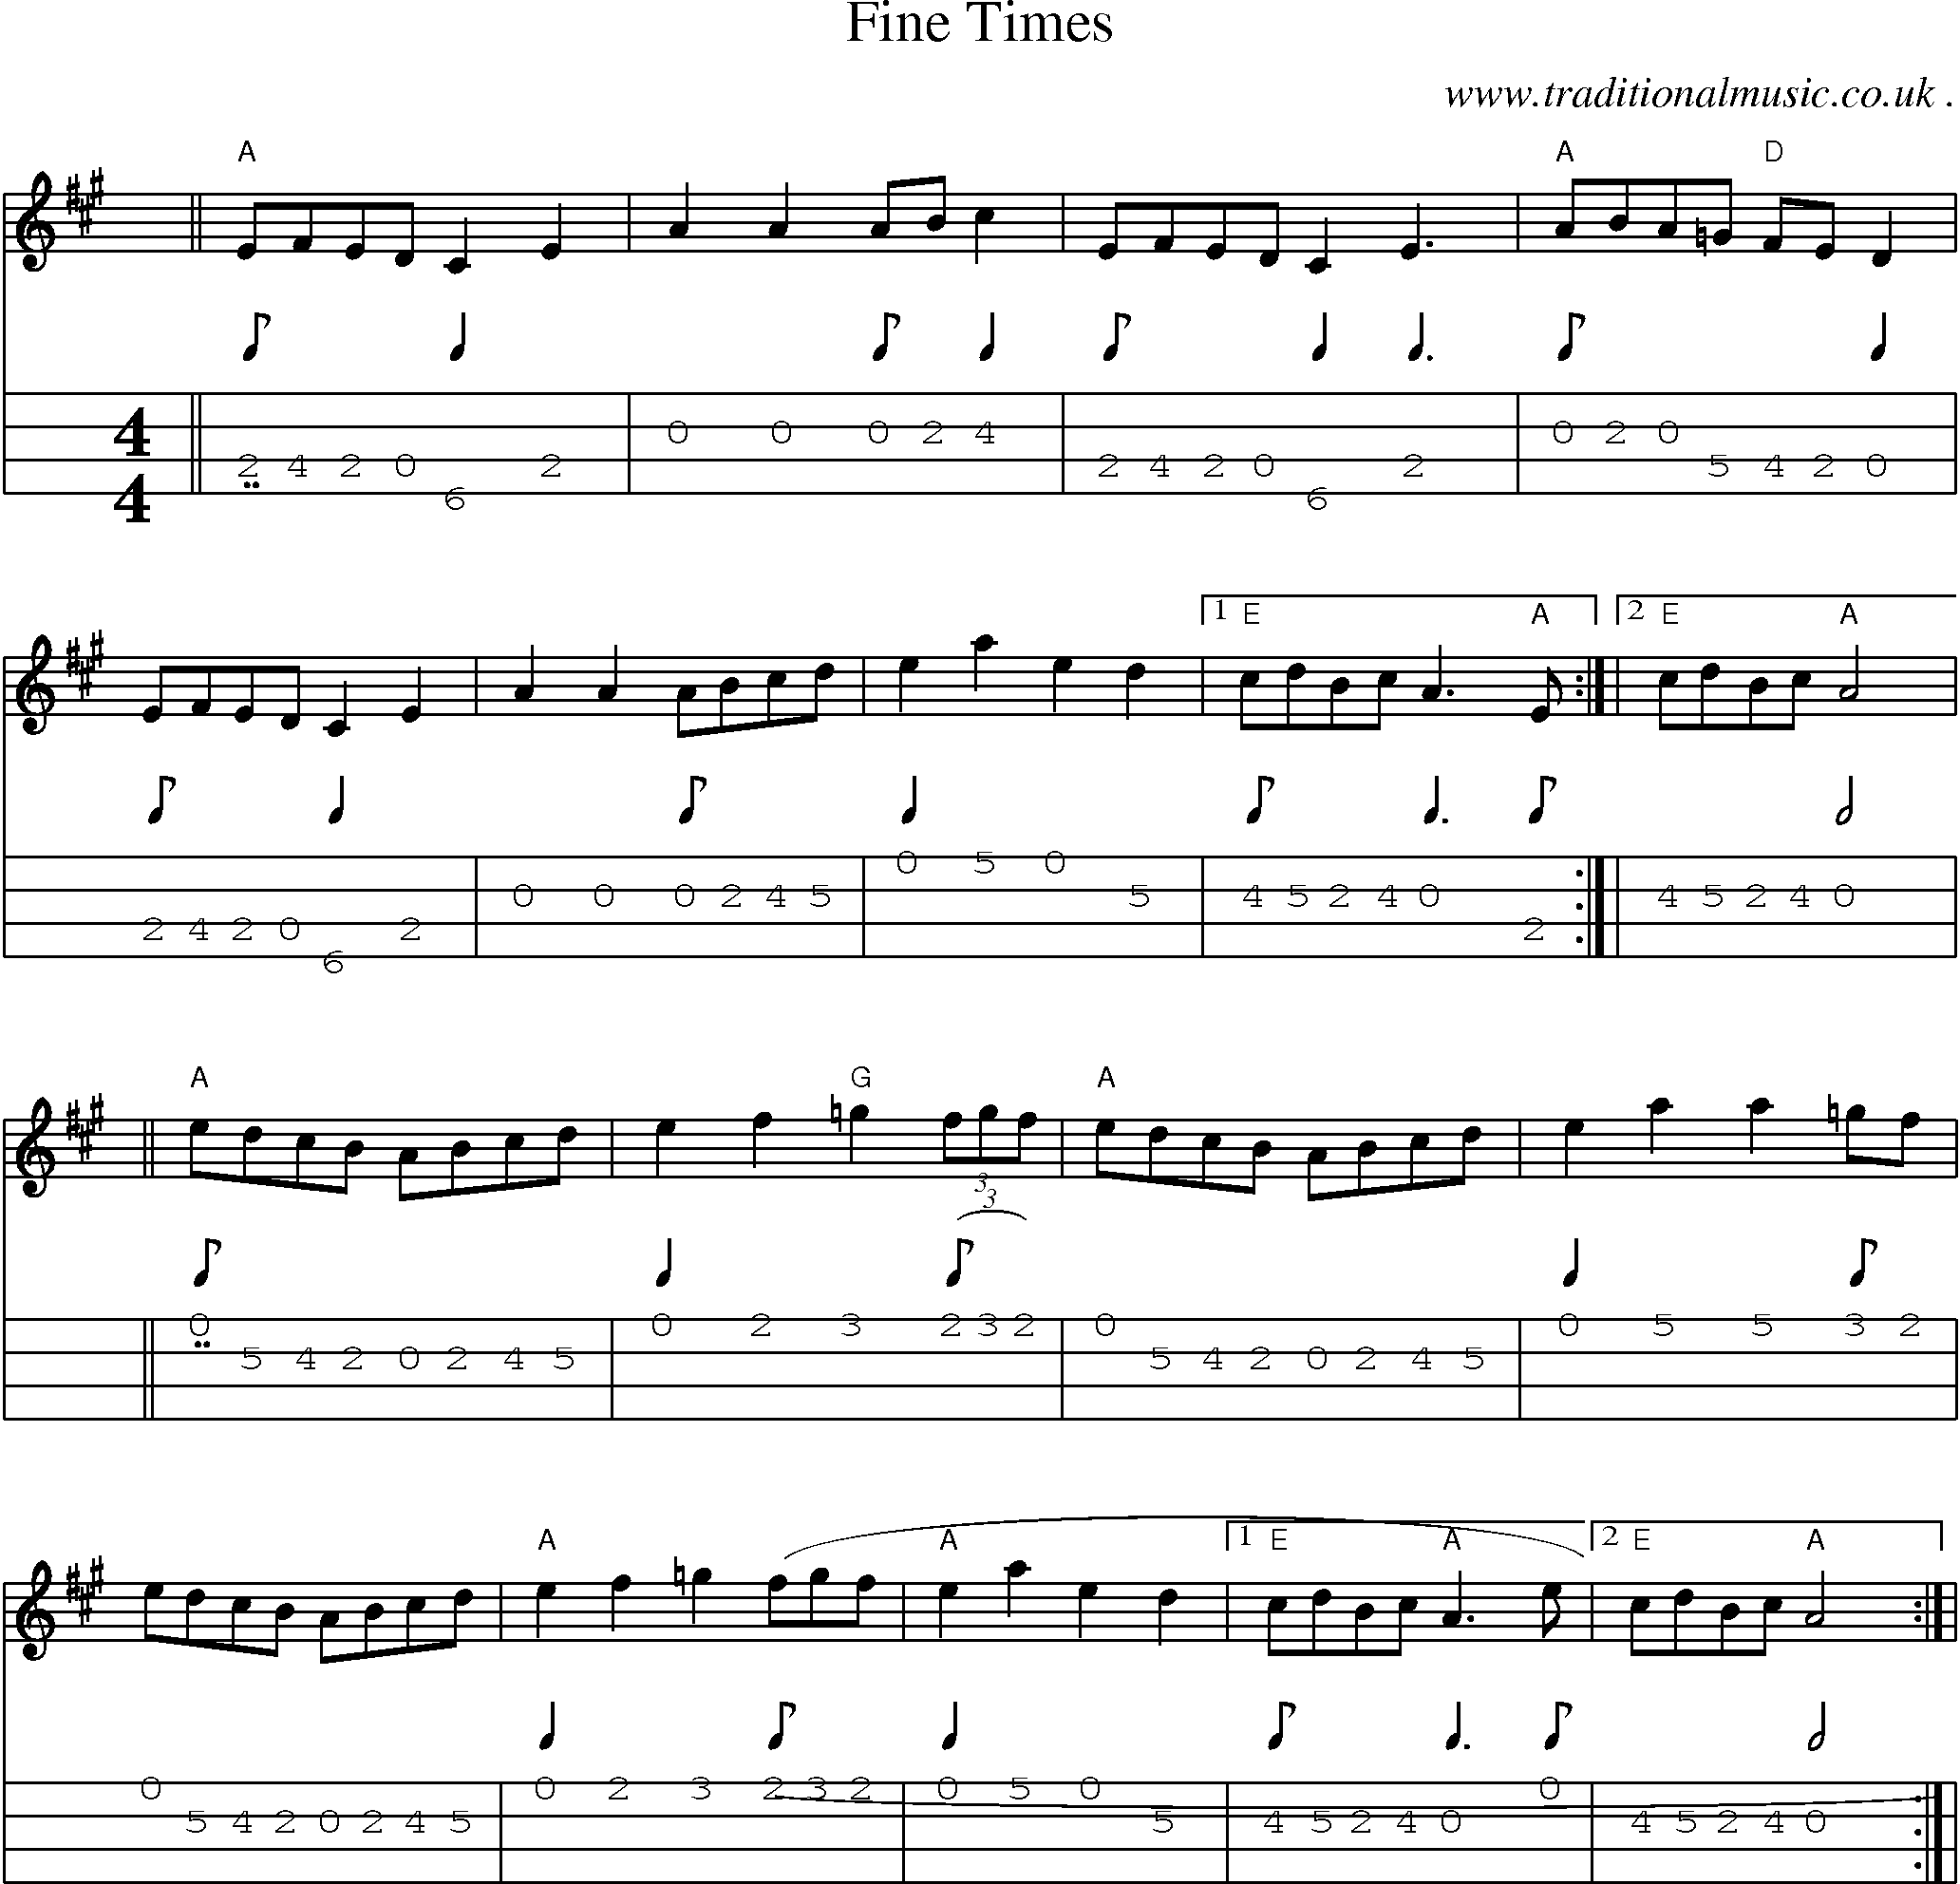 Sheet-music  score, Chords and Mandolin Tabs for Fine Times